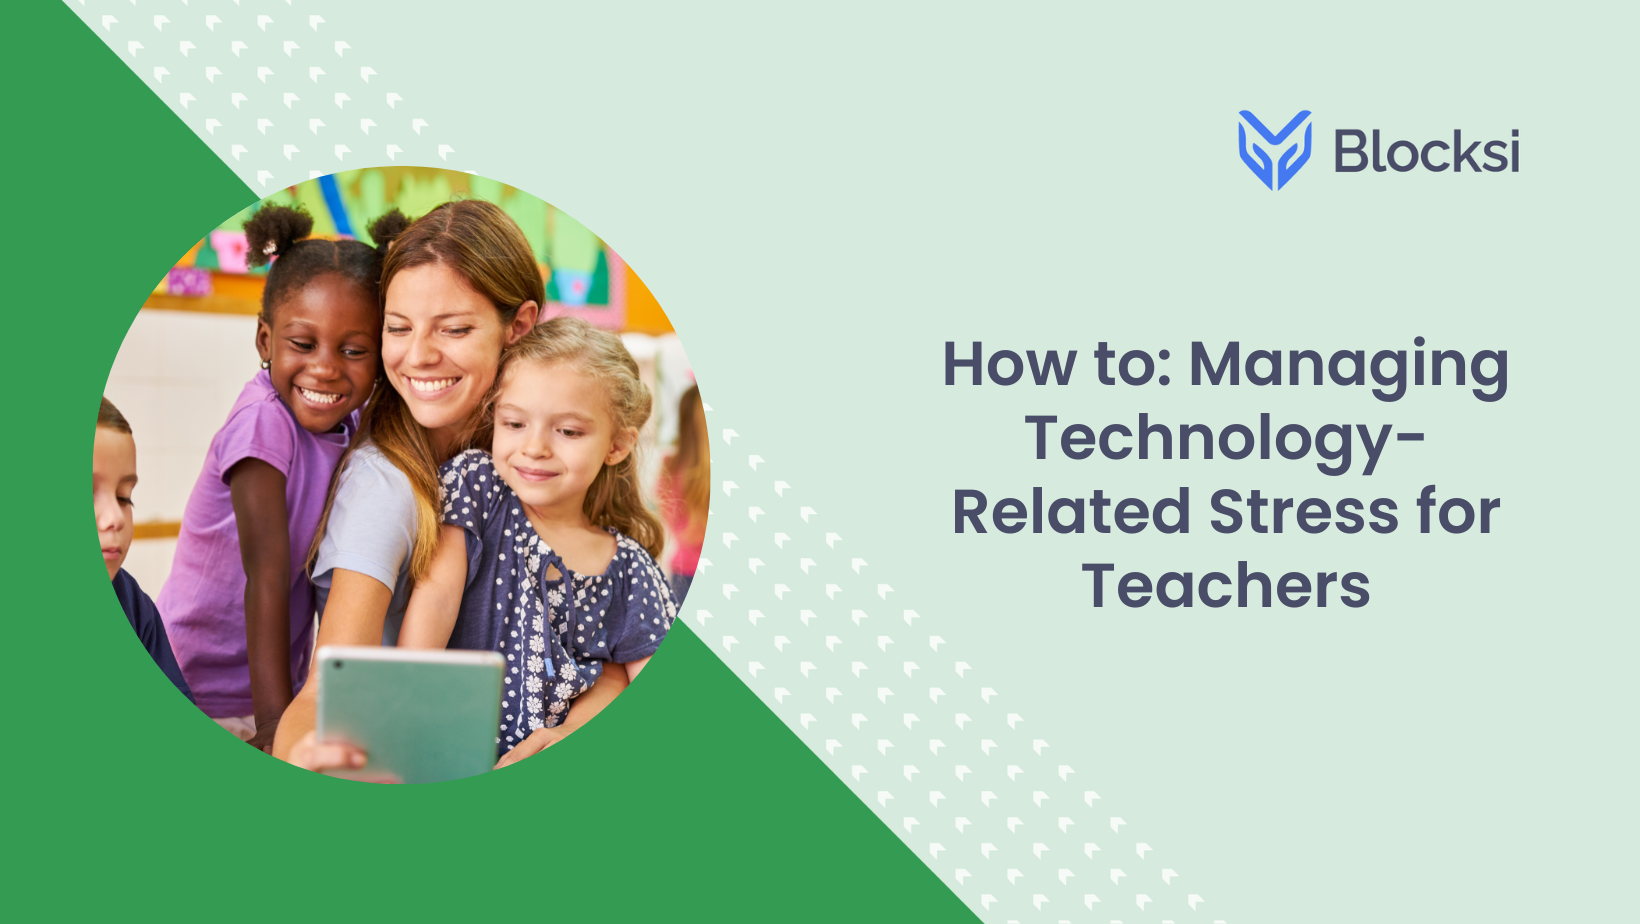 How to: Managing Technology-Related Stress for Teachers